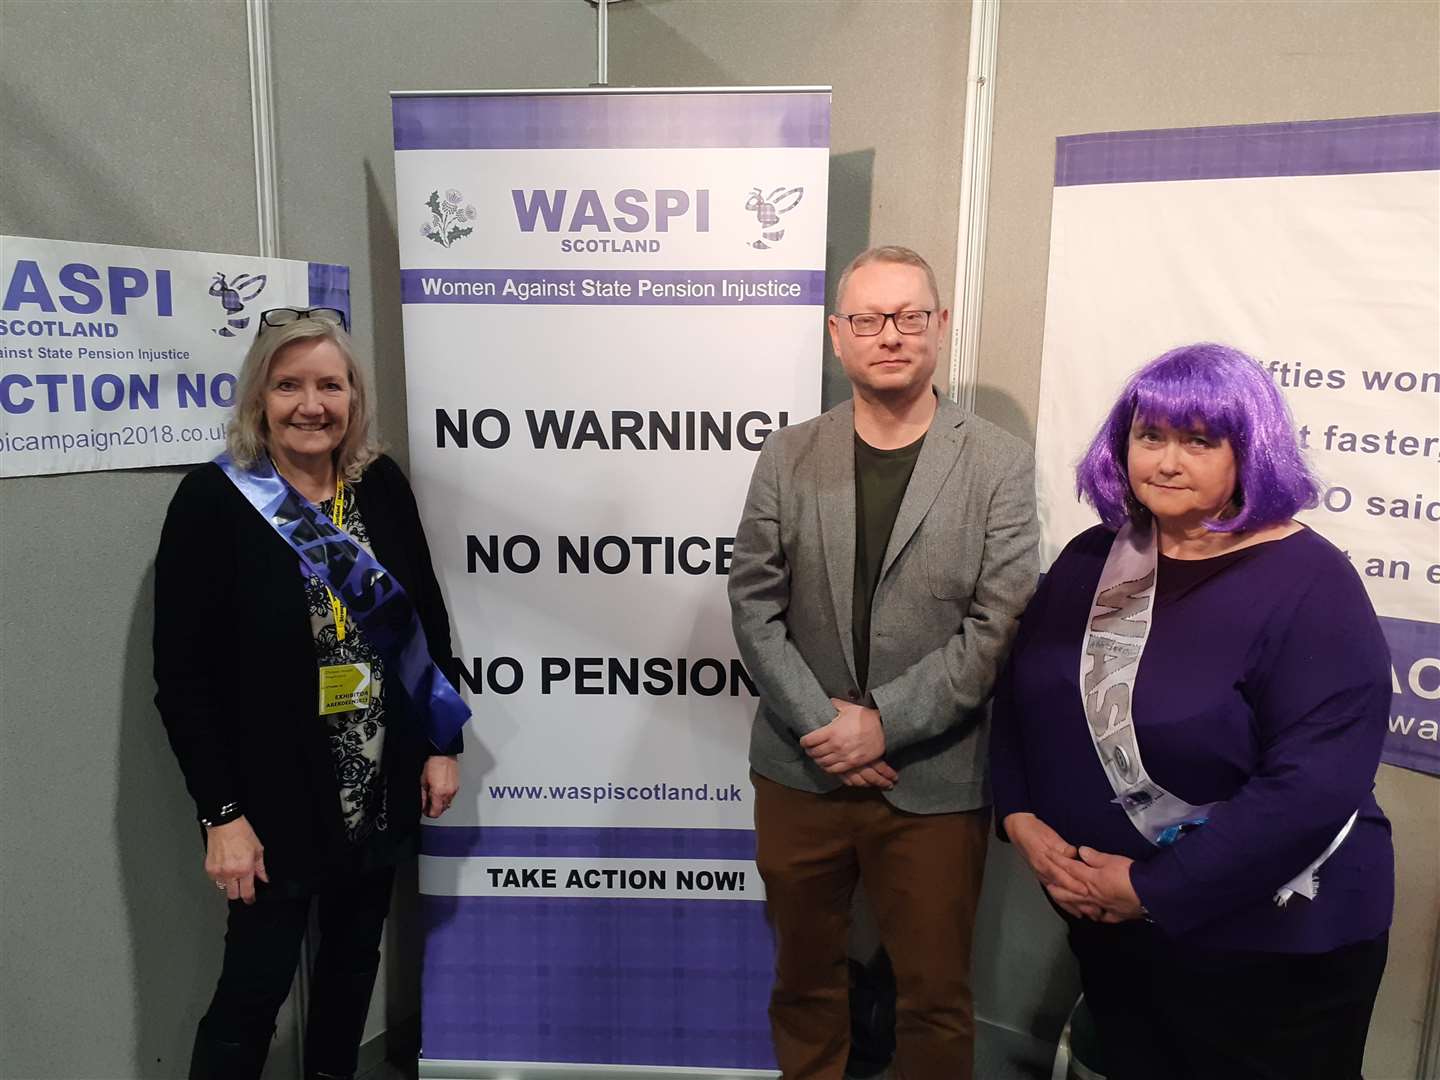 Richard Thomson MP with WASPI campaigners Christine Houston (l) and Anne Andrew.